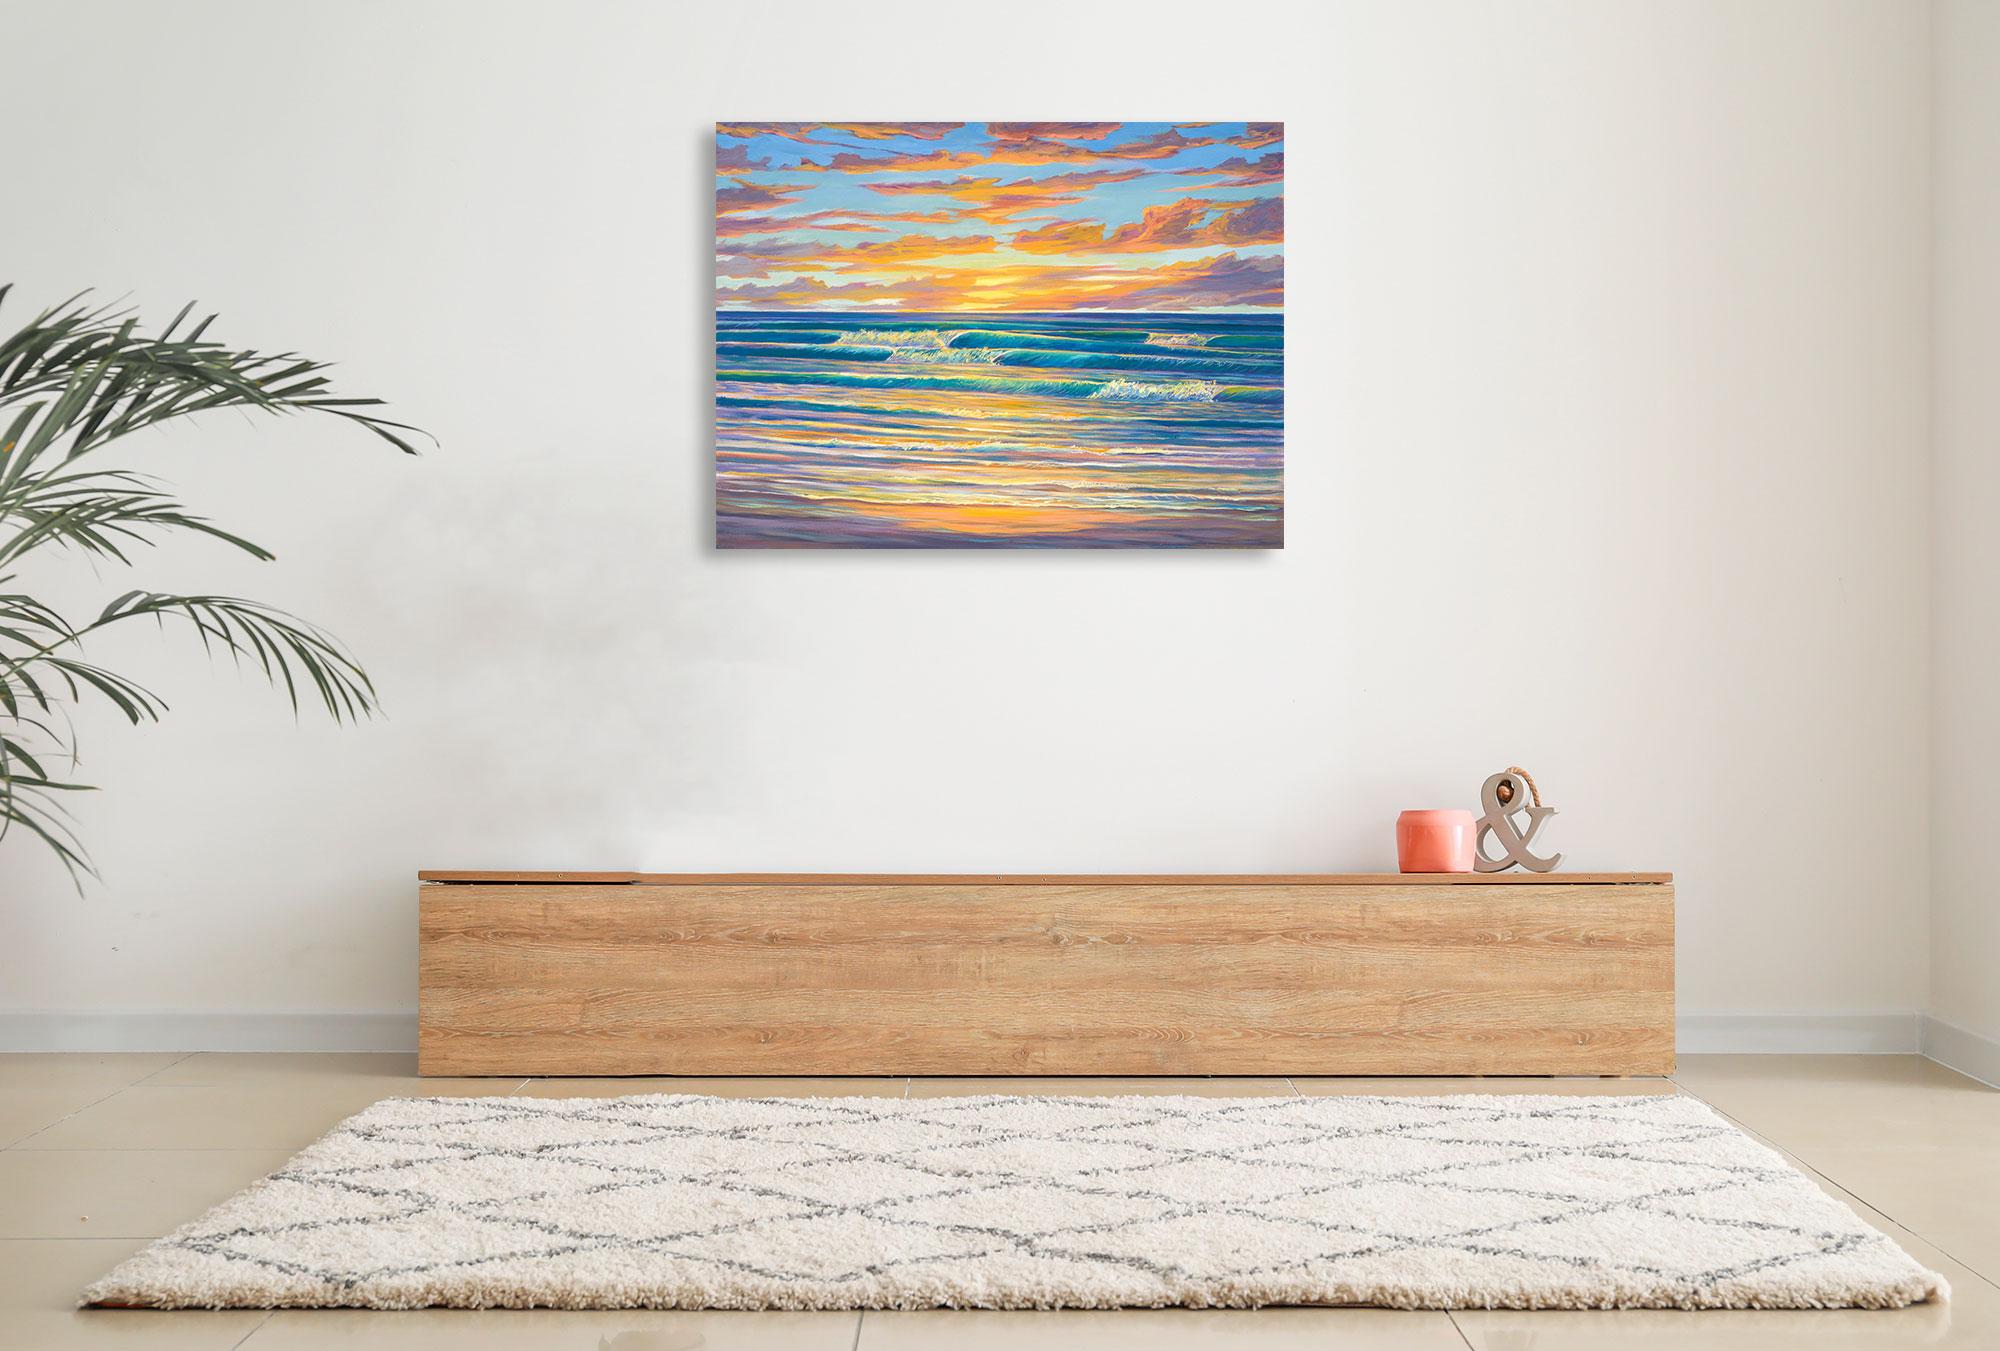 Carmel Beach Sunset Surf - Landscape Painting - Oil On Canvas By Dante Rondo For Sale 1